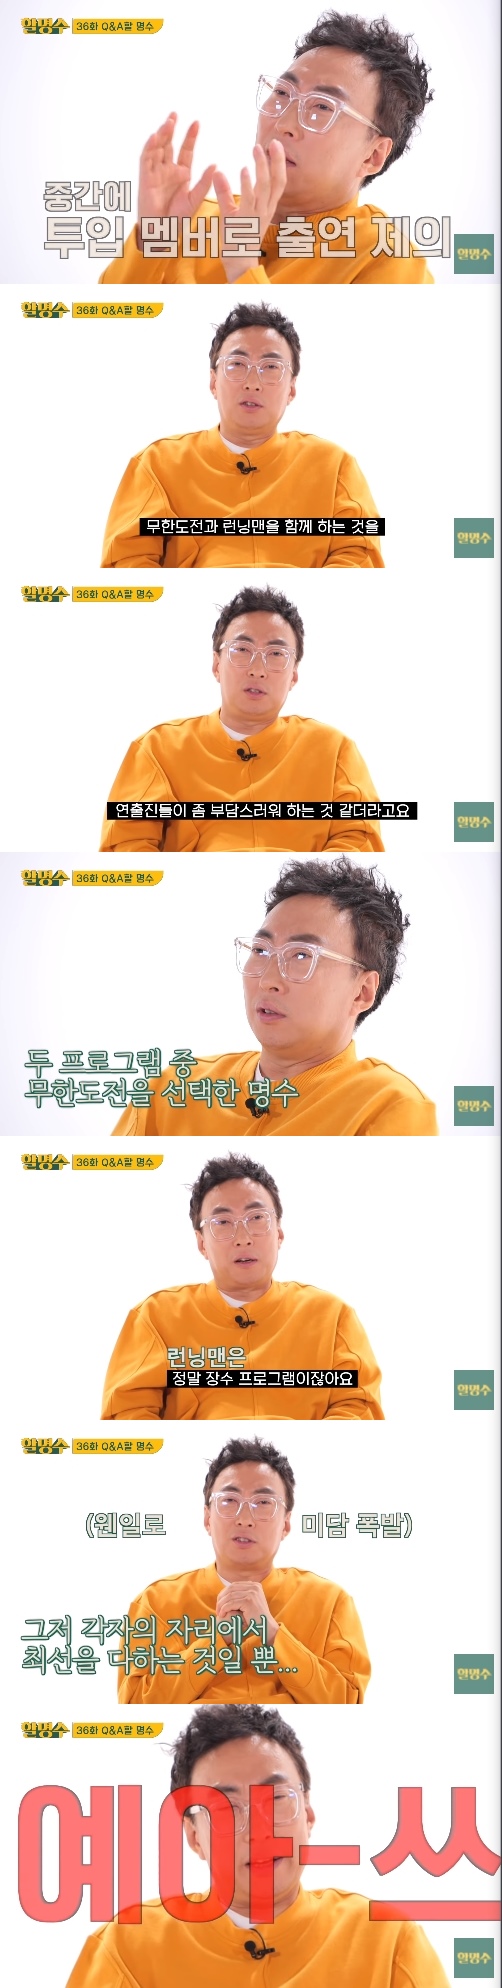 Broadcaster Park Myeong-su has revealed he has rebuffed the Running Man member proposal.On the 15th, YouTube channel Halmyongsu conducted Q & A time with 500,000 subscribers.Park Myeong-su said, What was the most disappointing program I had to show? SBS Running Man was cited.Park Myeong-su said, In the middle of the opportunity to put in a member, the directors are a little burdened by the fact that they are working together with Running Man and Infinite Challenge.So I chose Infinite Challenge, he added.But Running Man is a longevity program. Running Man will be done (thats what it was), he said, laughing.I feel sorry that I would have liked to be together, but I can not solve it even if I feel sick with greed, he said. I just have to do my best and applaud (for them) what I am doing.But when he said, I envy you, I dont envy you, please answer YES or NO, he shouted Yes, leading to a laugh.Photo: The number of fatalities